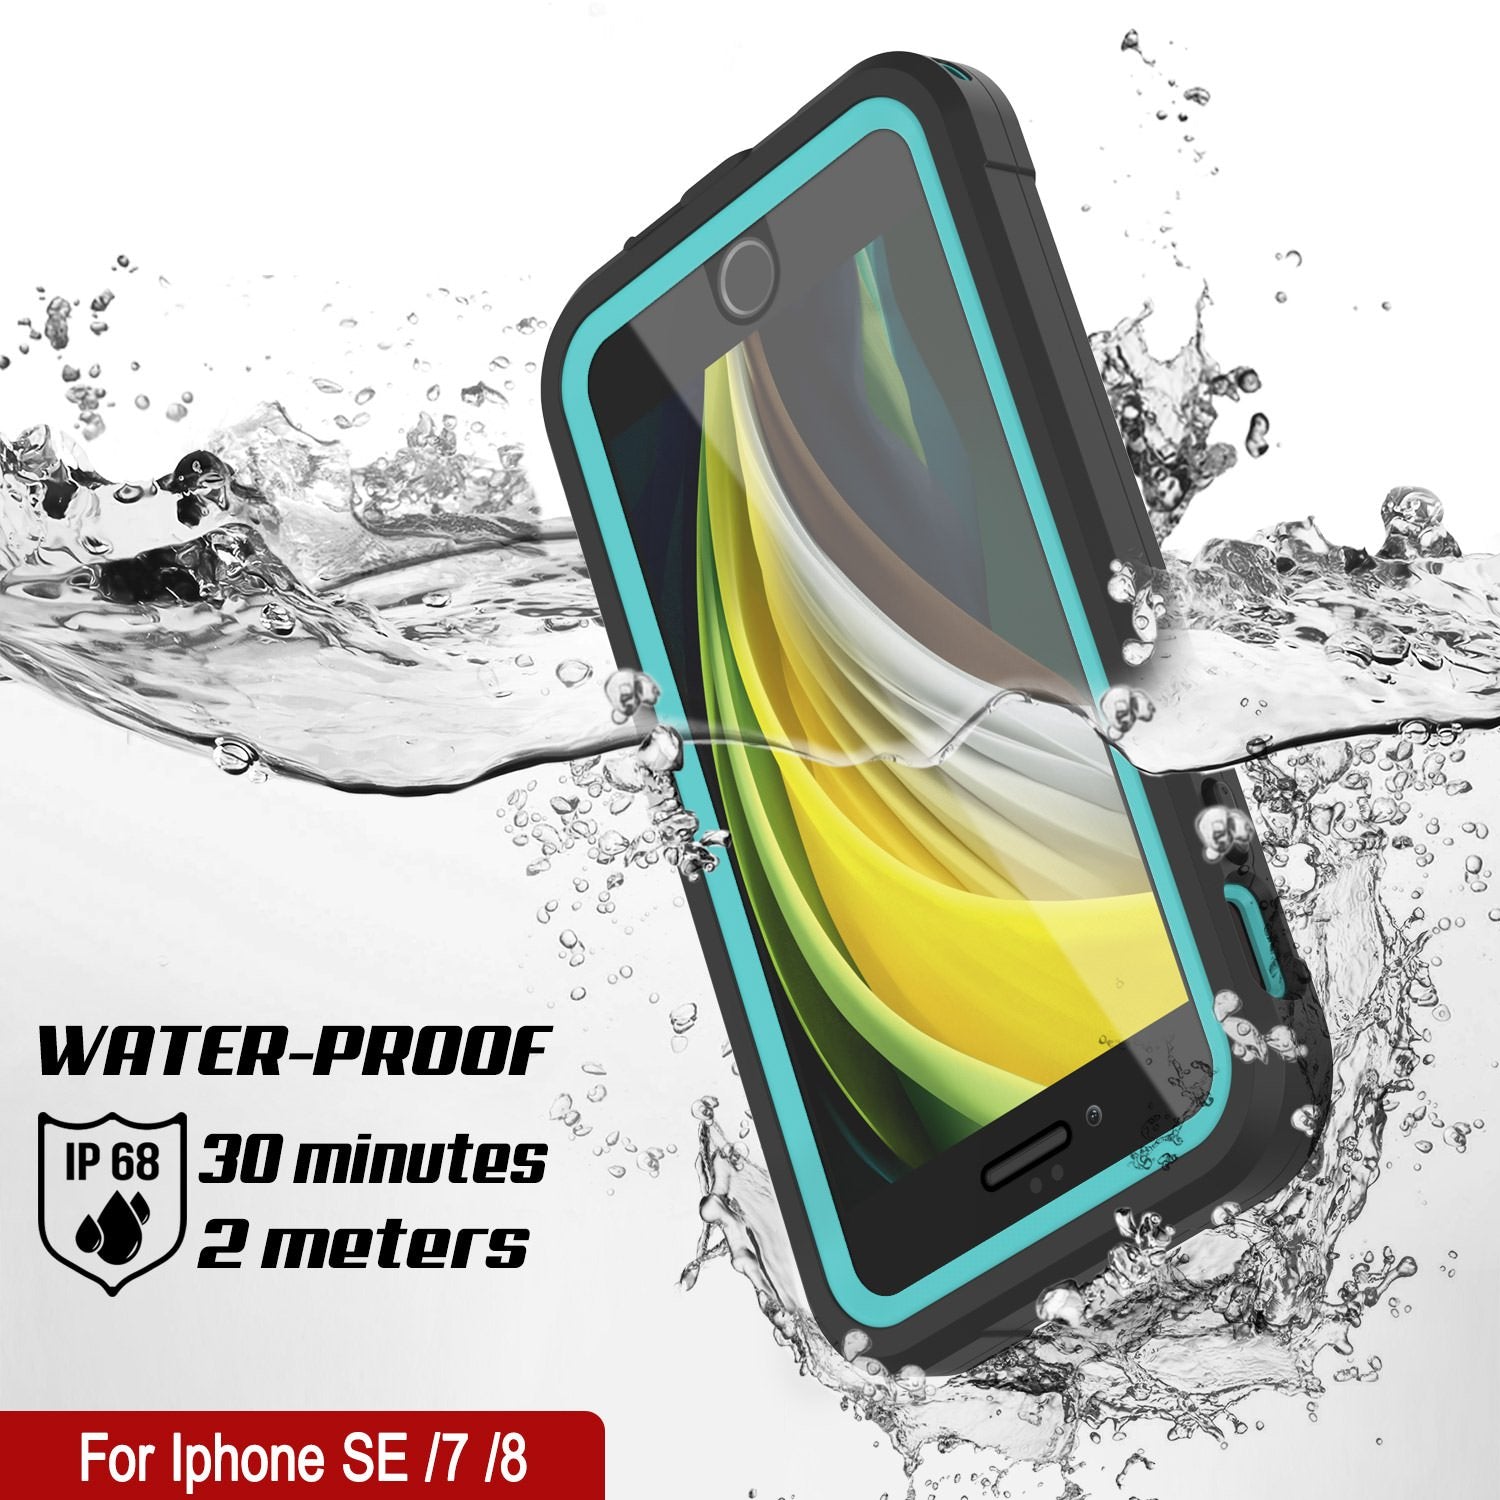 iPhone SE (4.7") Waterproof IP68 Case, Punkcase [teal]  [Maximus Series] [Slim Fit] [IP68 Certified] [Shockresistant] Clear Armor Cover with Screen Protector | Ultimate Protection